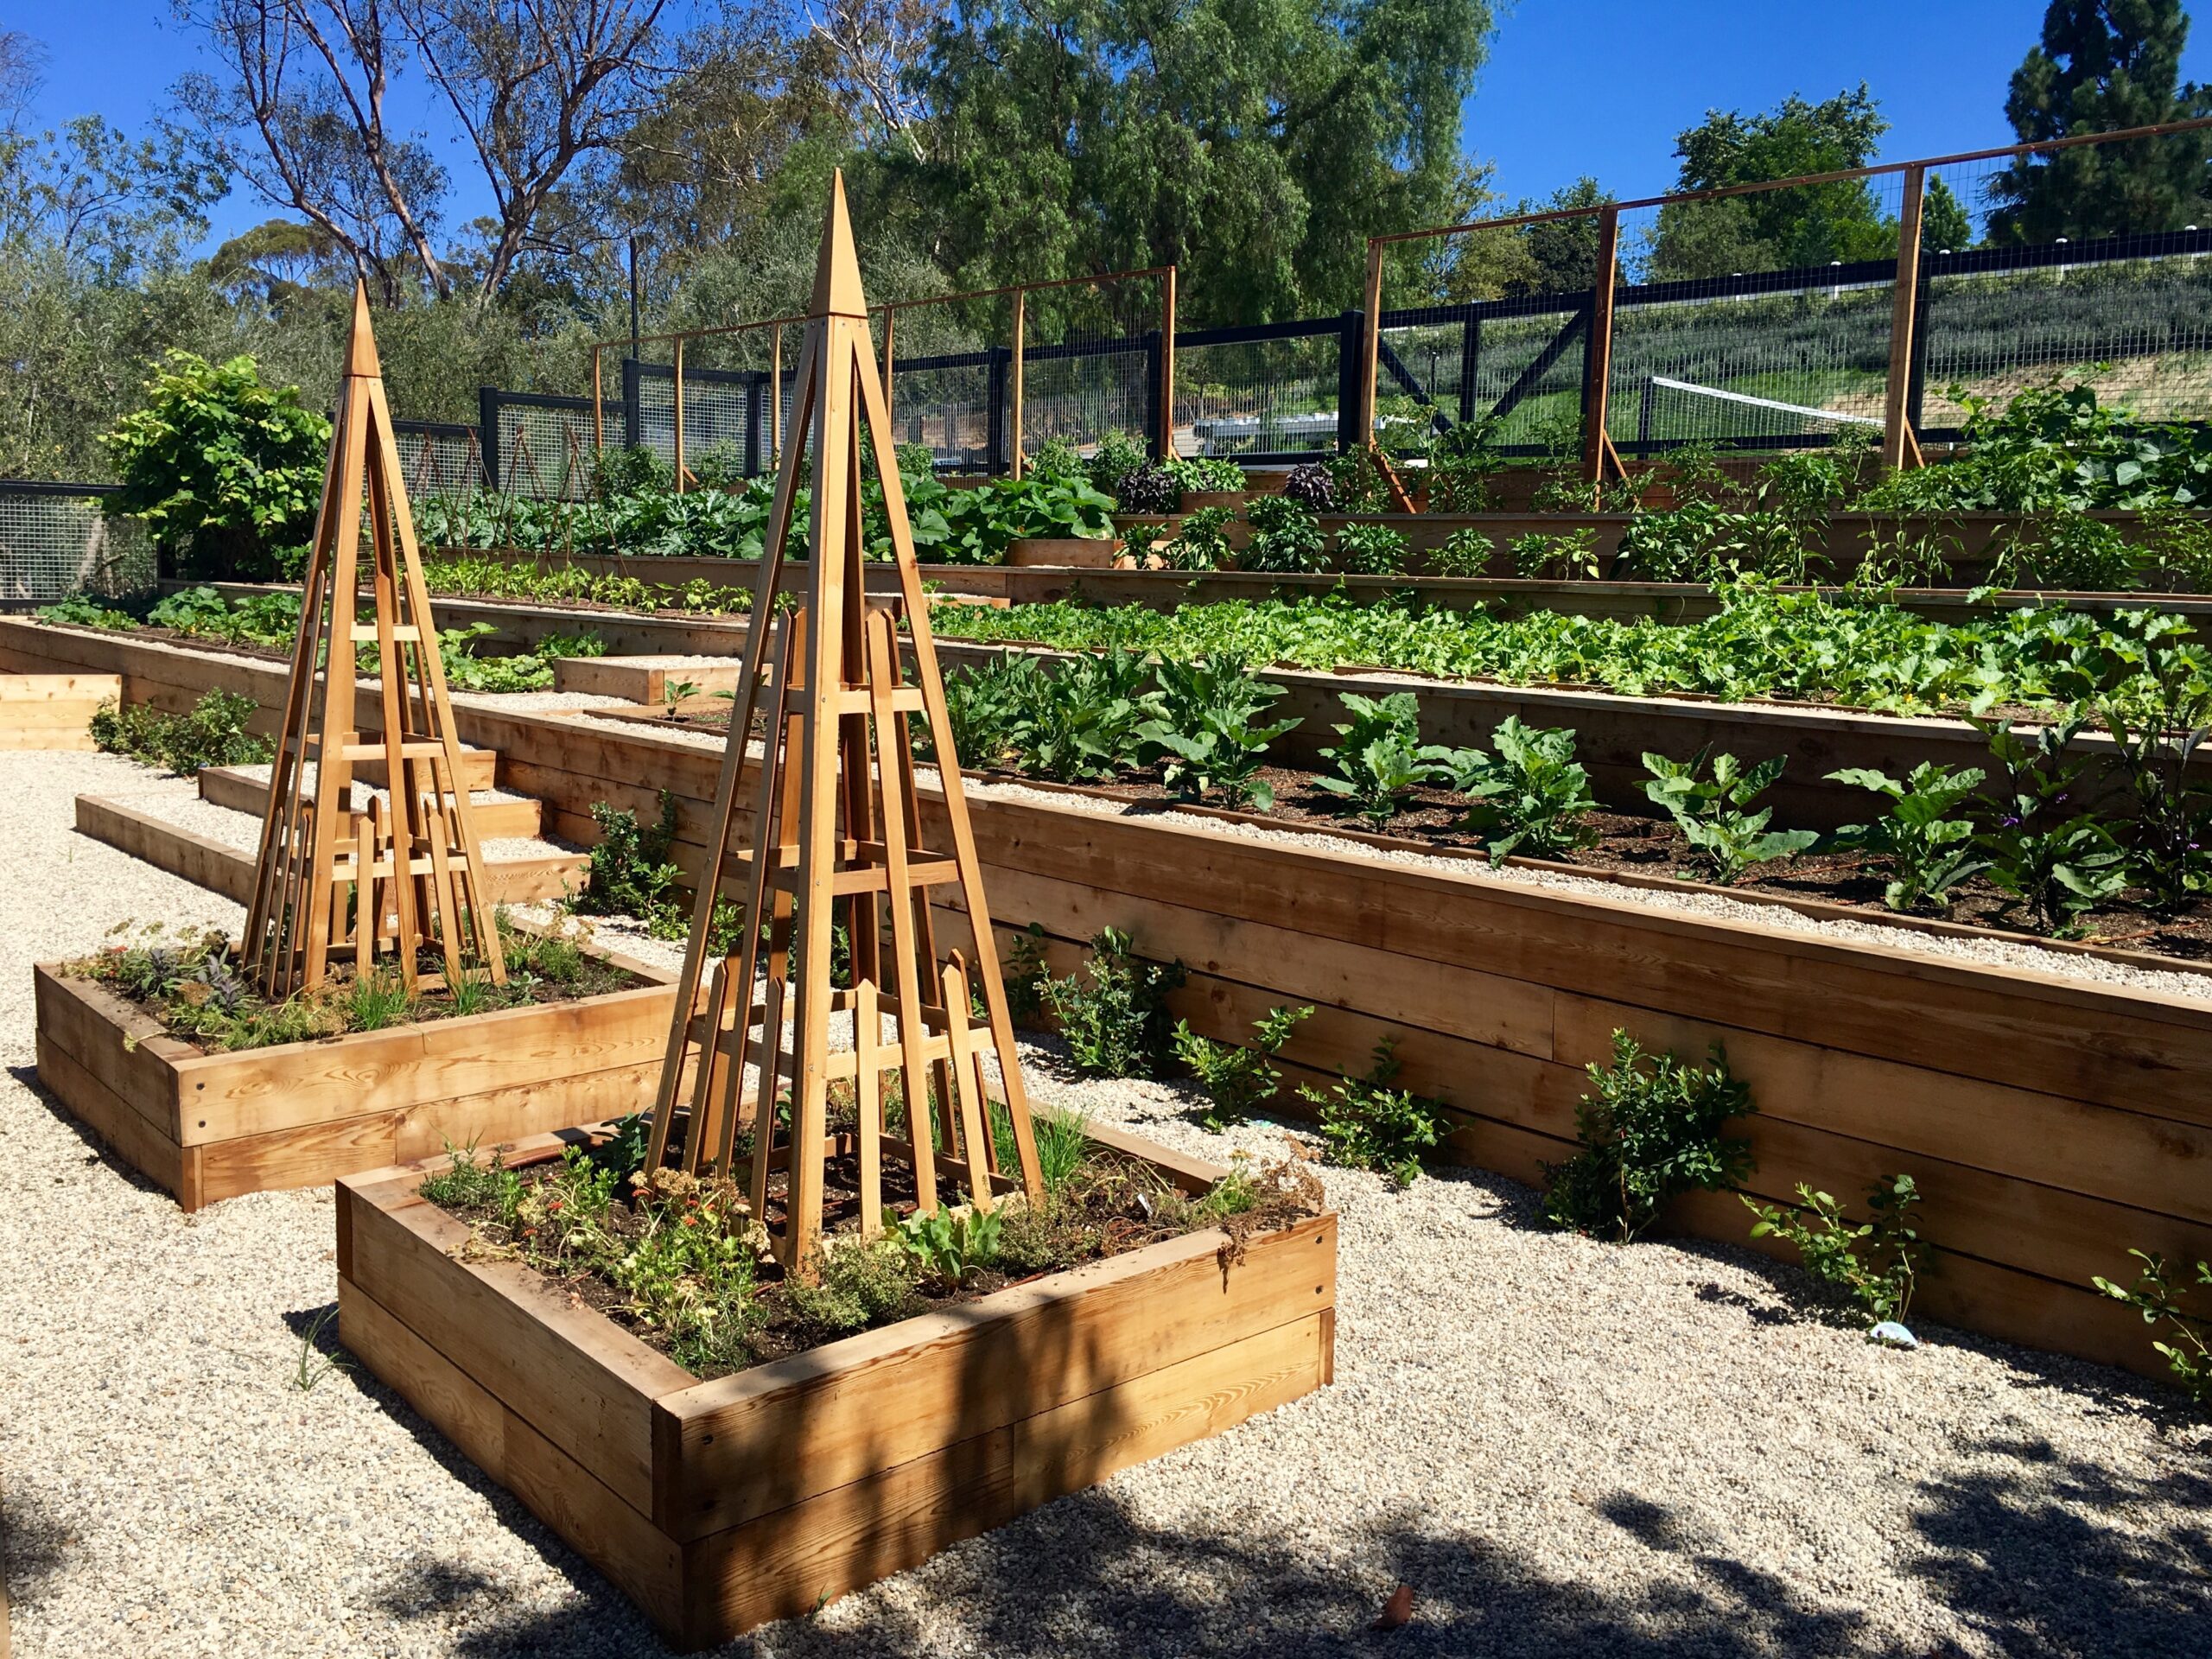 Farmscape’s Landscaping and Gardening Services: Where Sustainable Landscape Design Meets Organic Farming